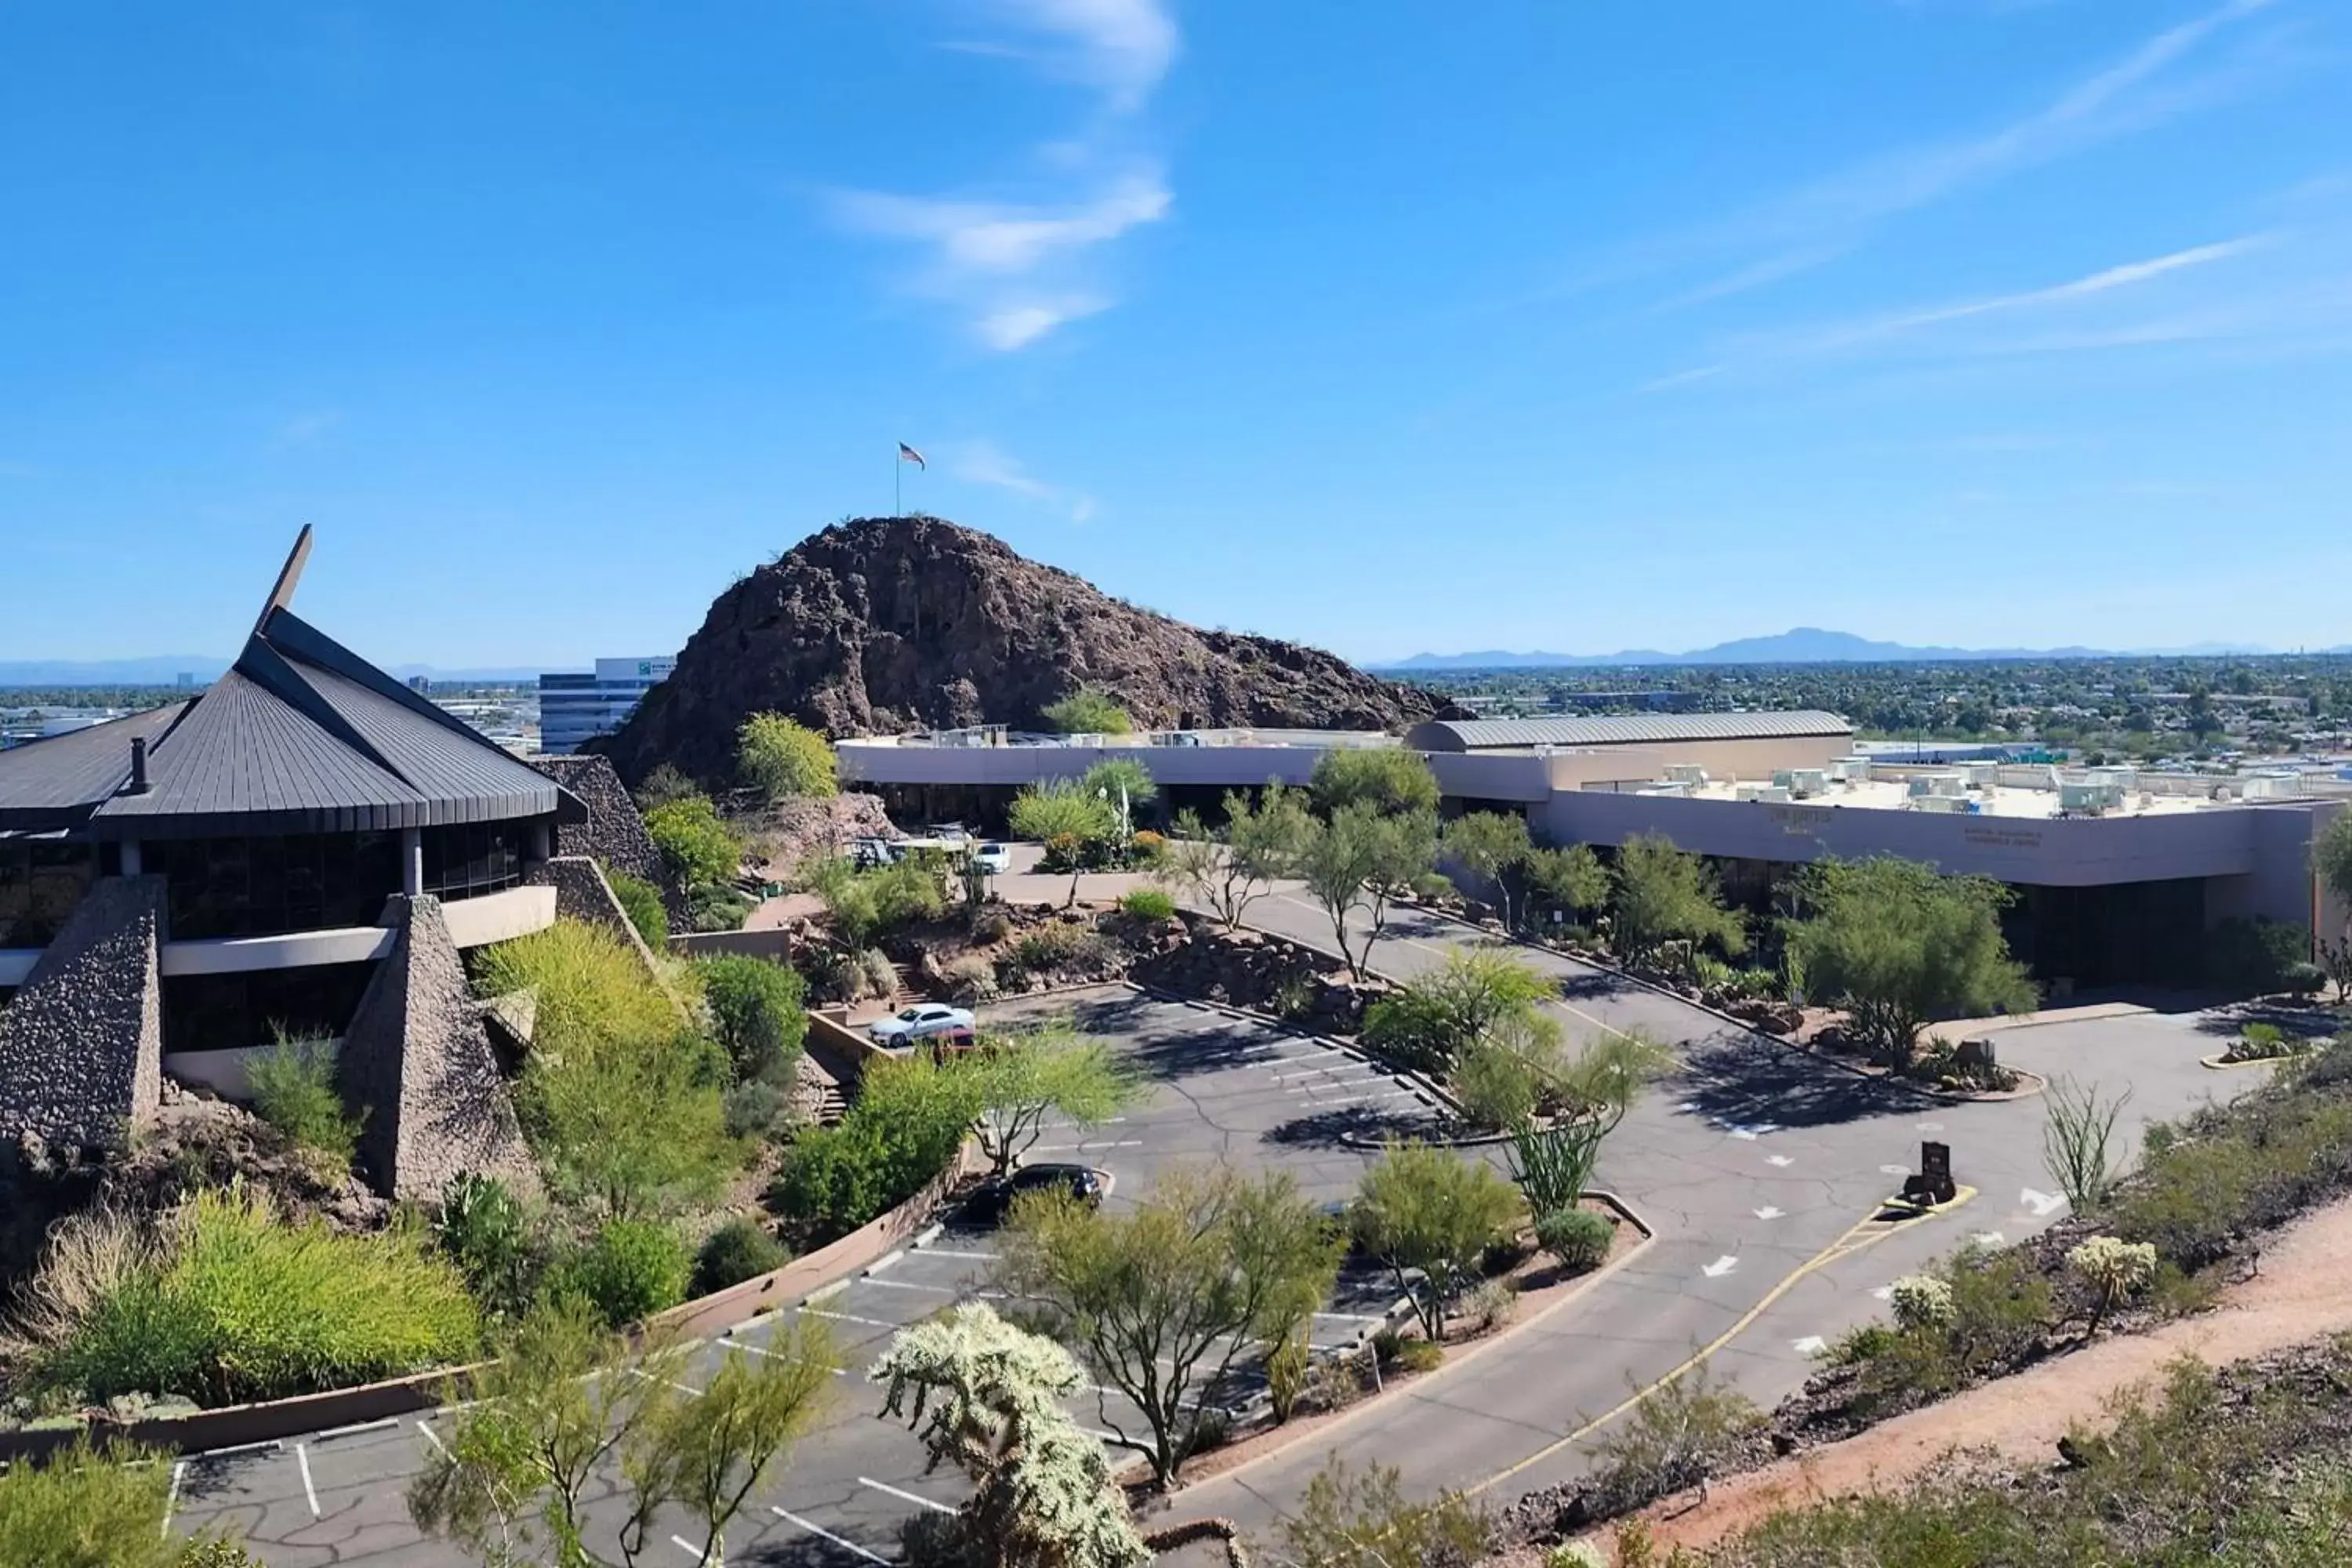 Property building in Phoenix Marriott Resort Tempe at The Buttes